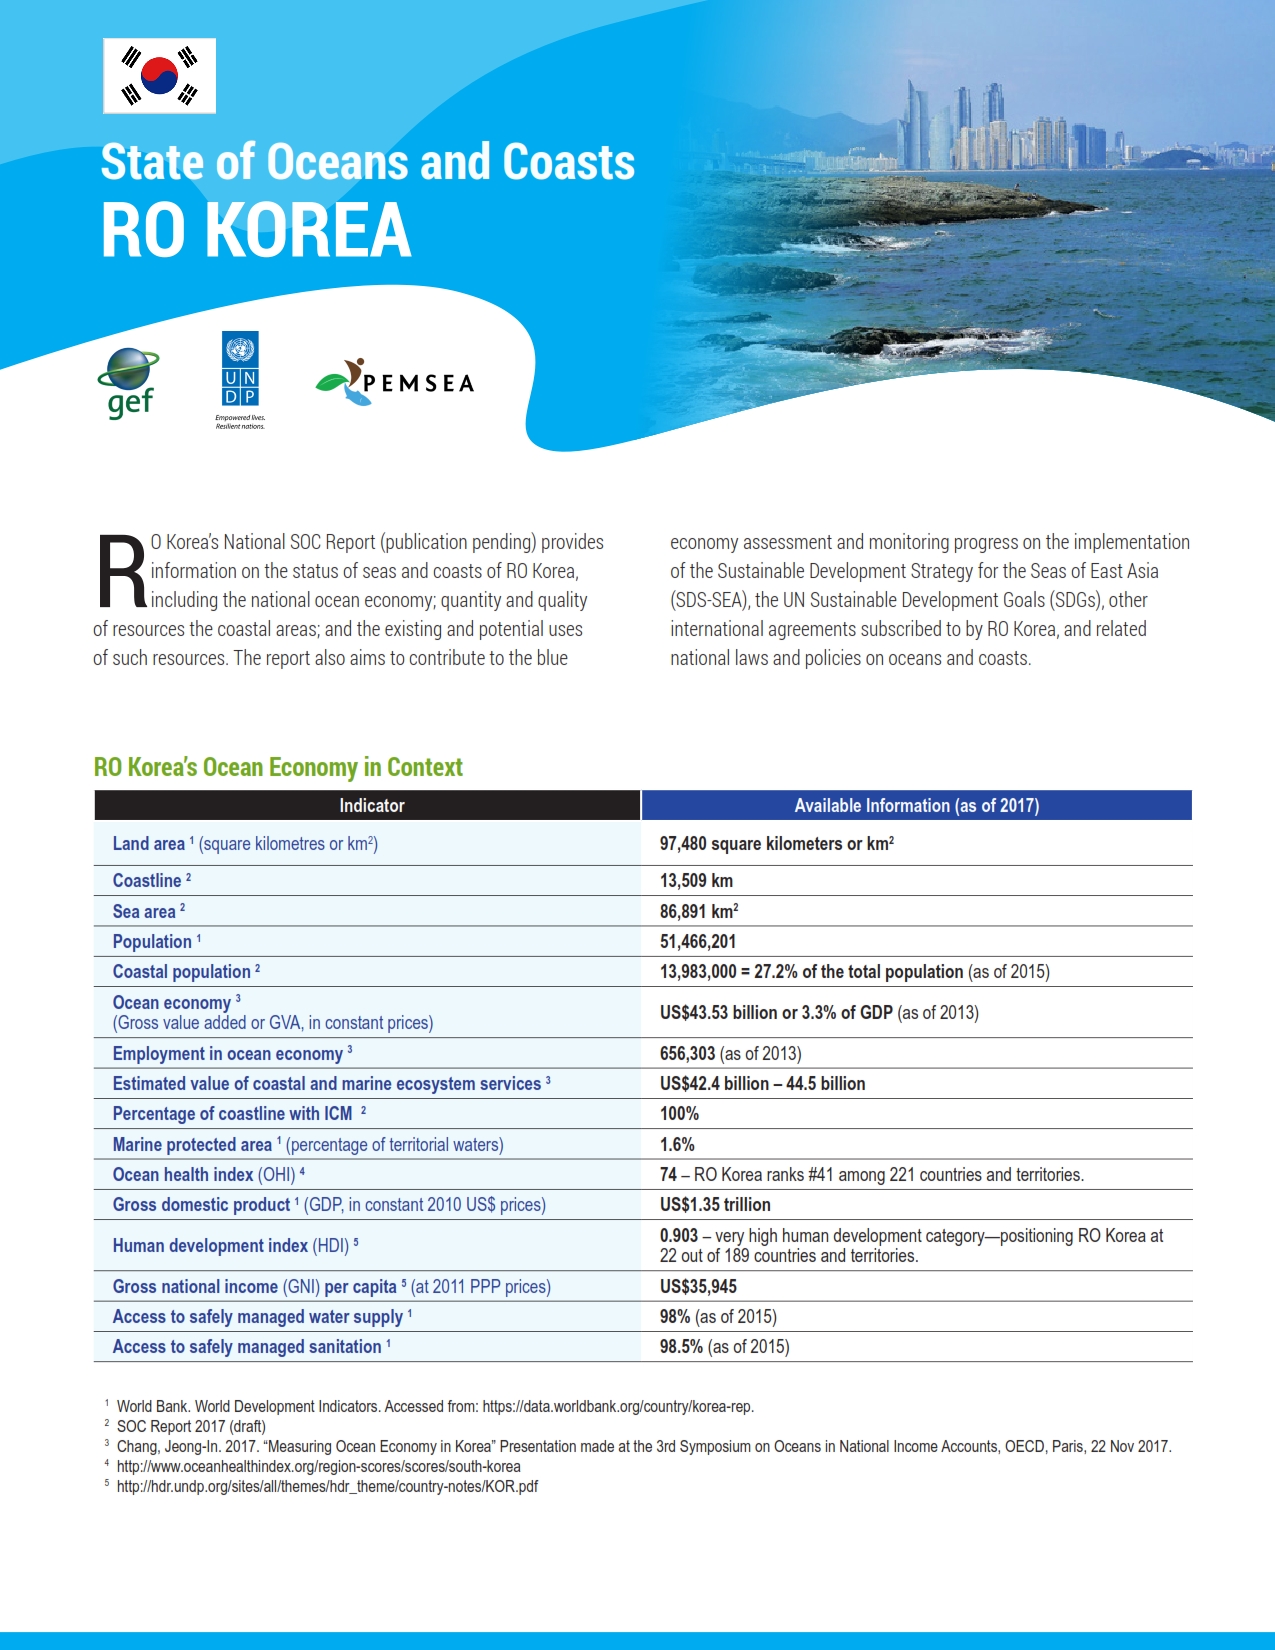 State of Oceans and Coasts of RO Korea